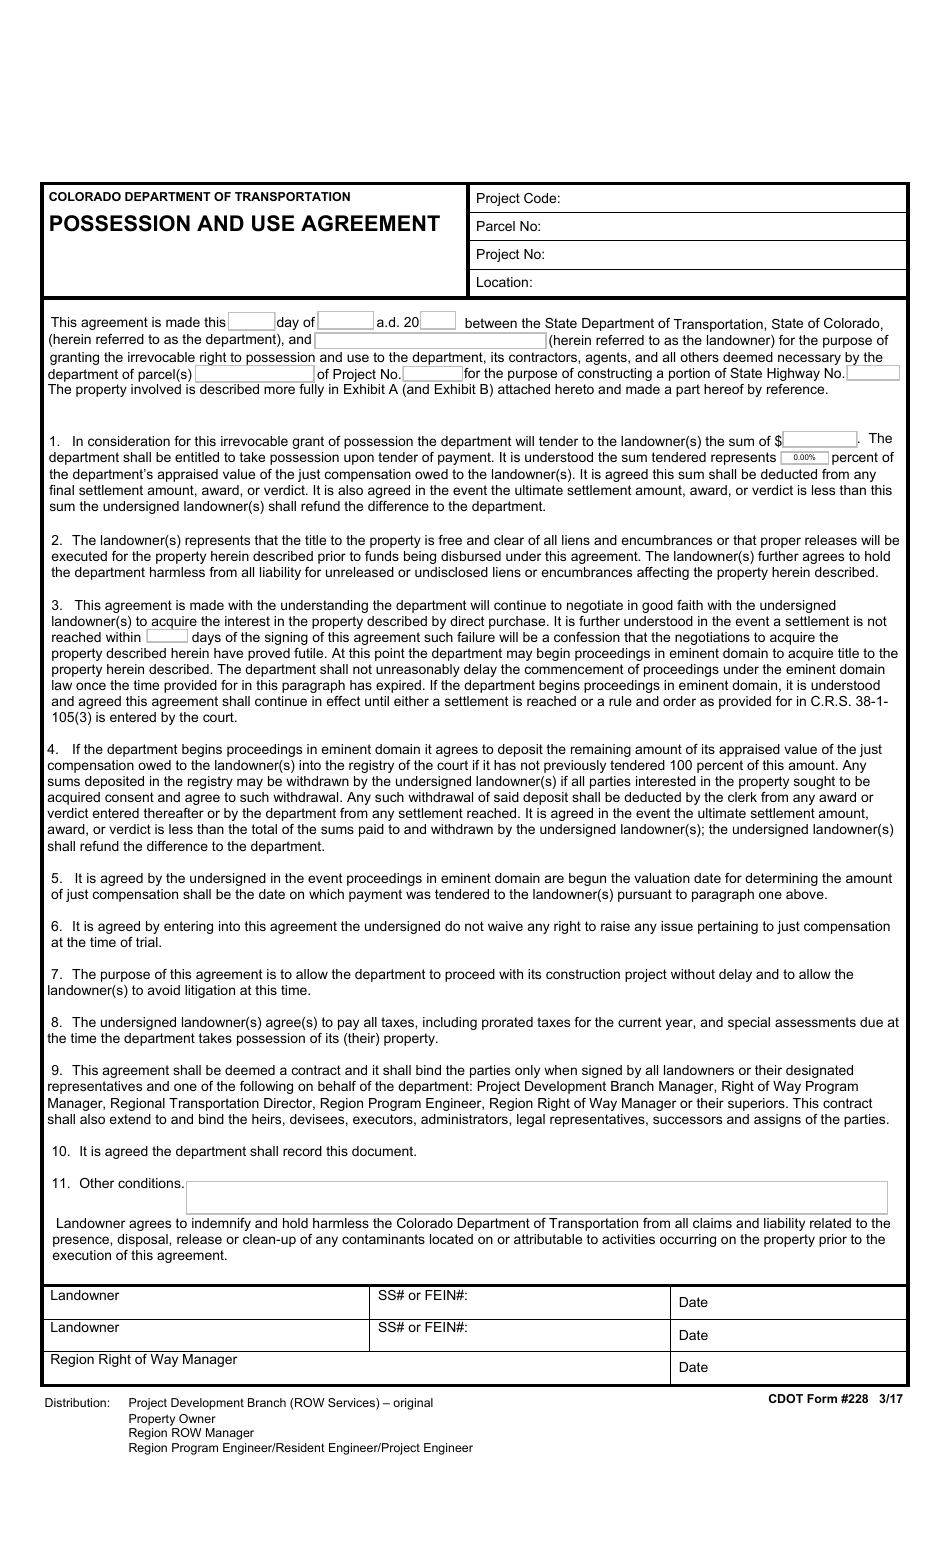 CDOT Form 228 Possession and Use Agreement - Colorado, Page 1